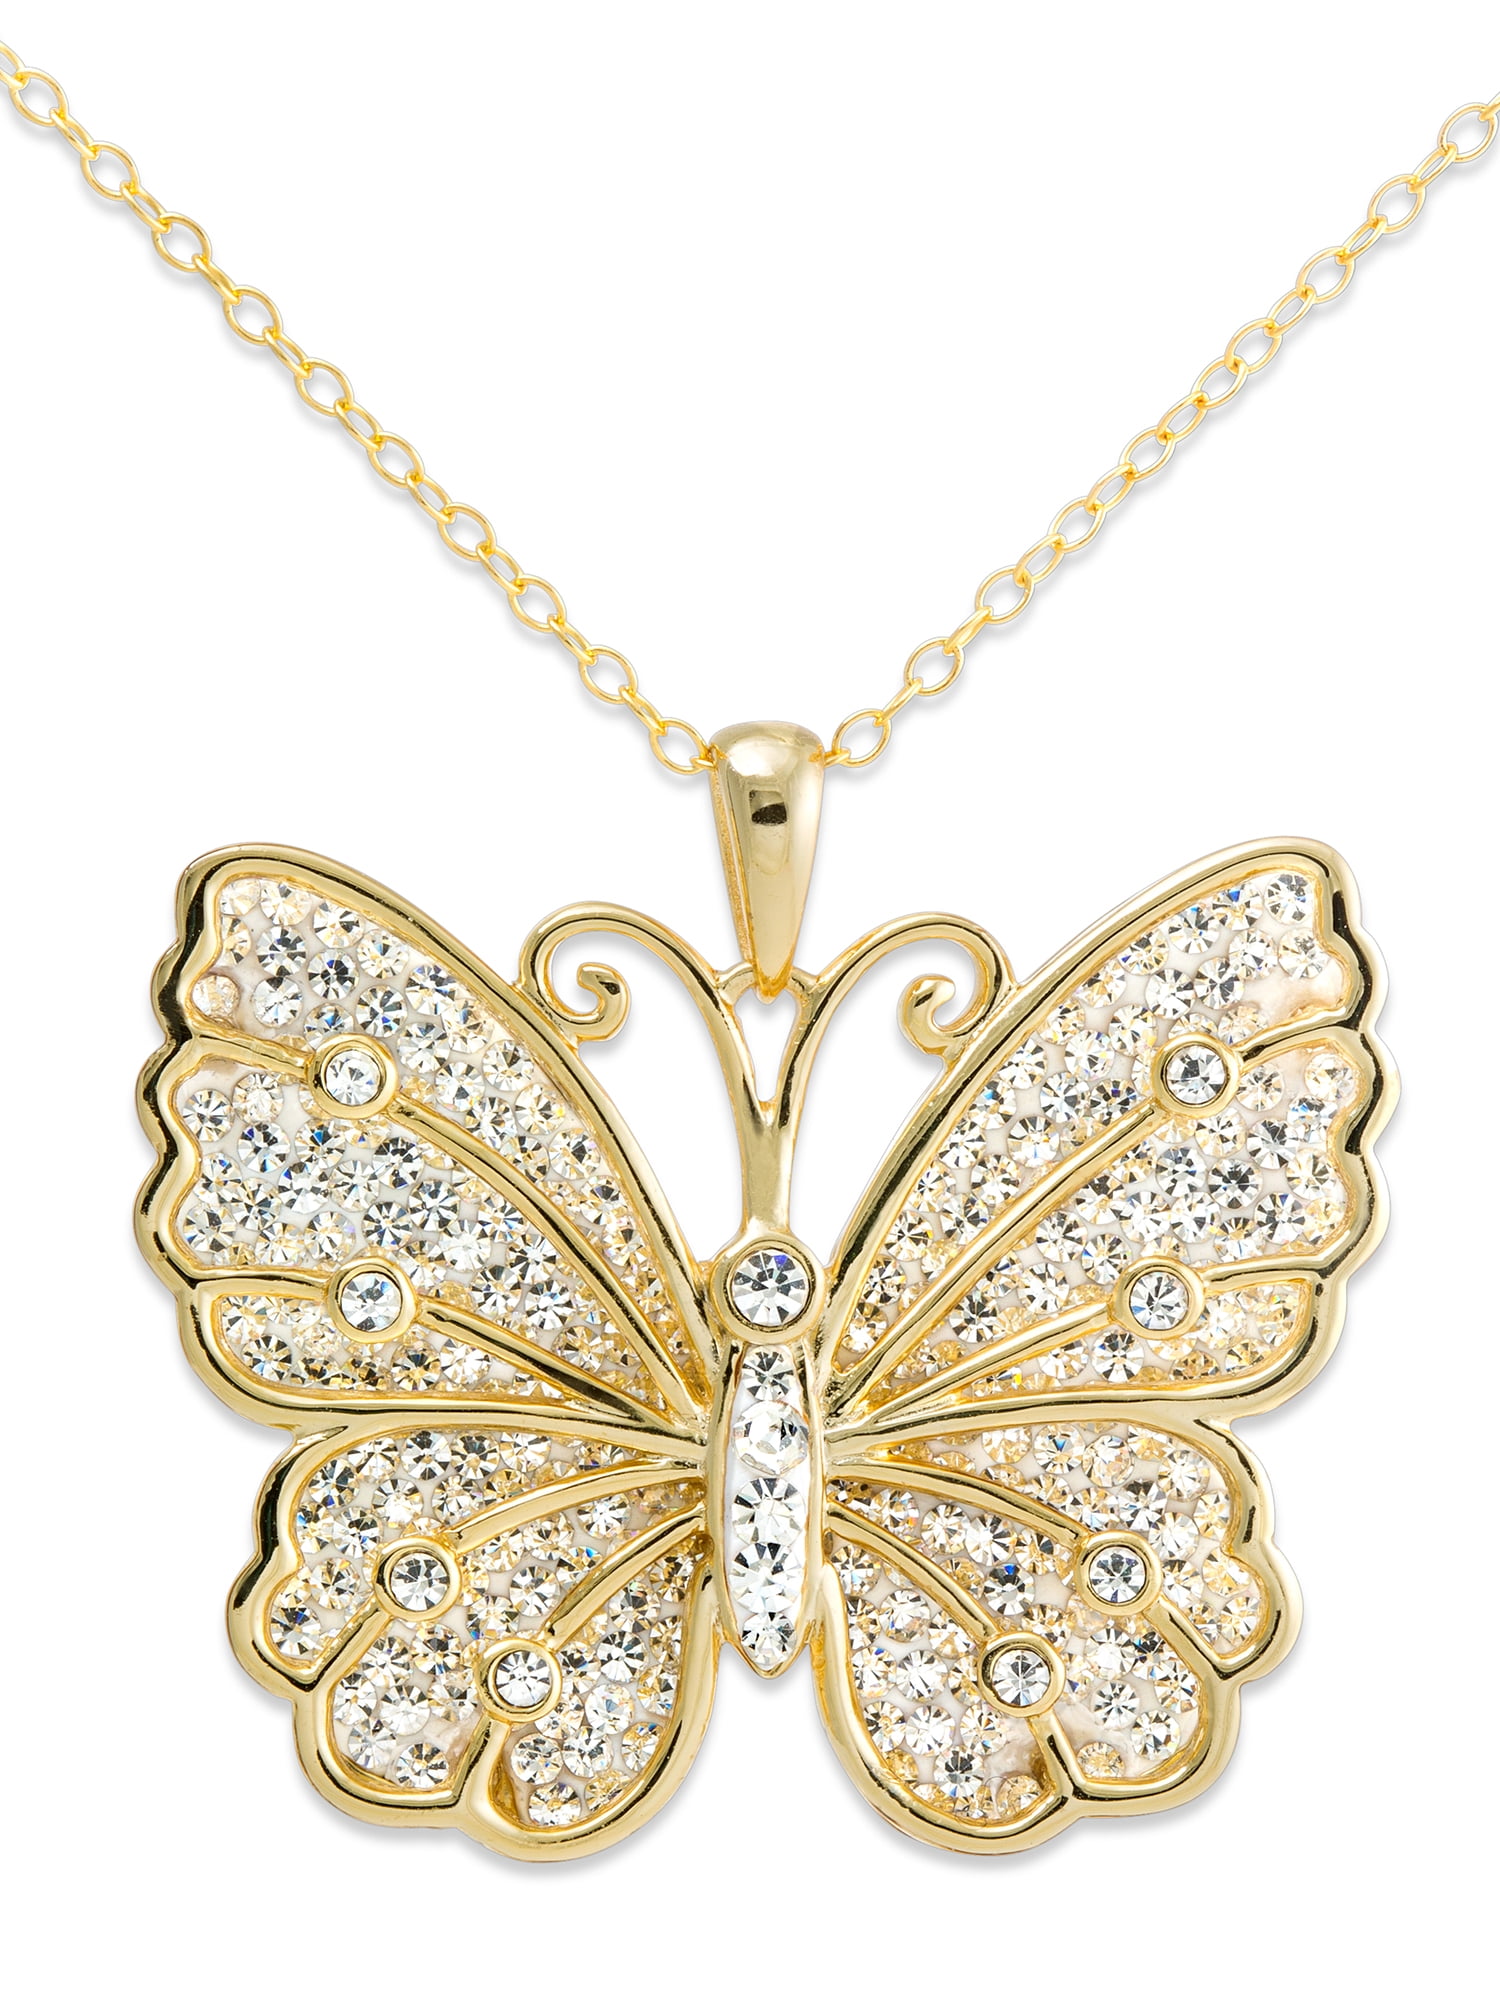 Adisaer Gold Plated Pendant Necklaces for Women Cubic Zirconia Butterfly